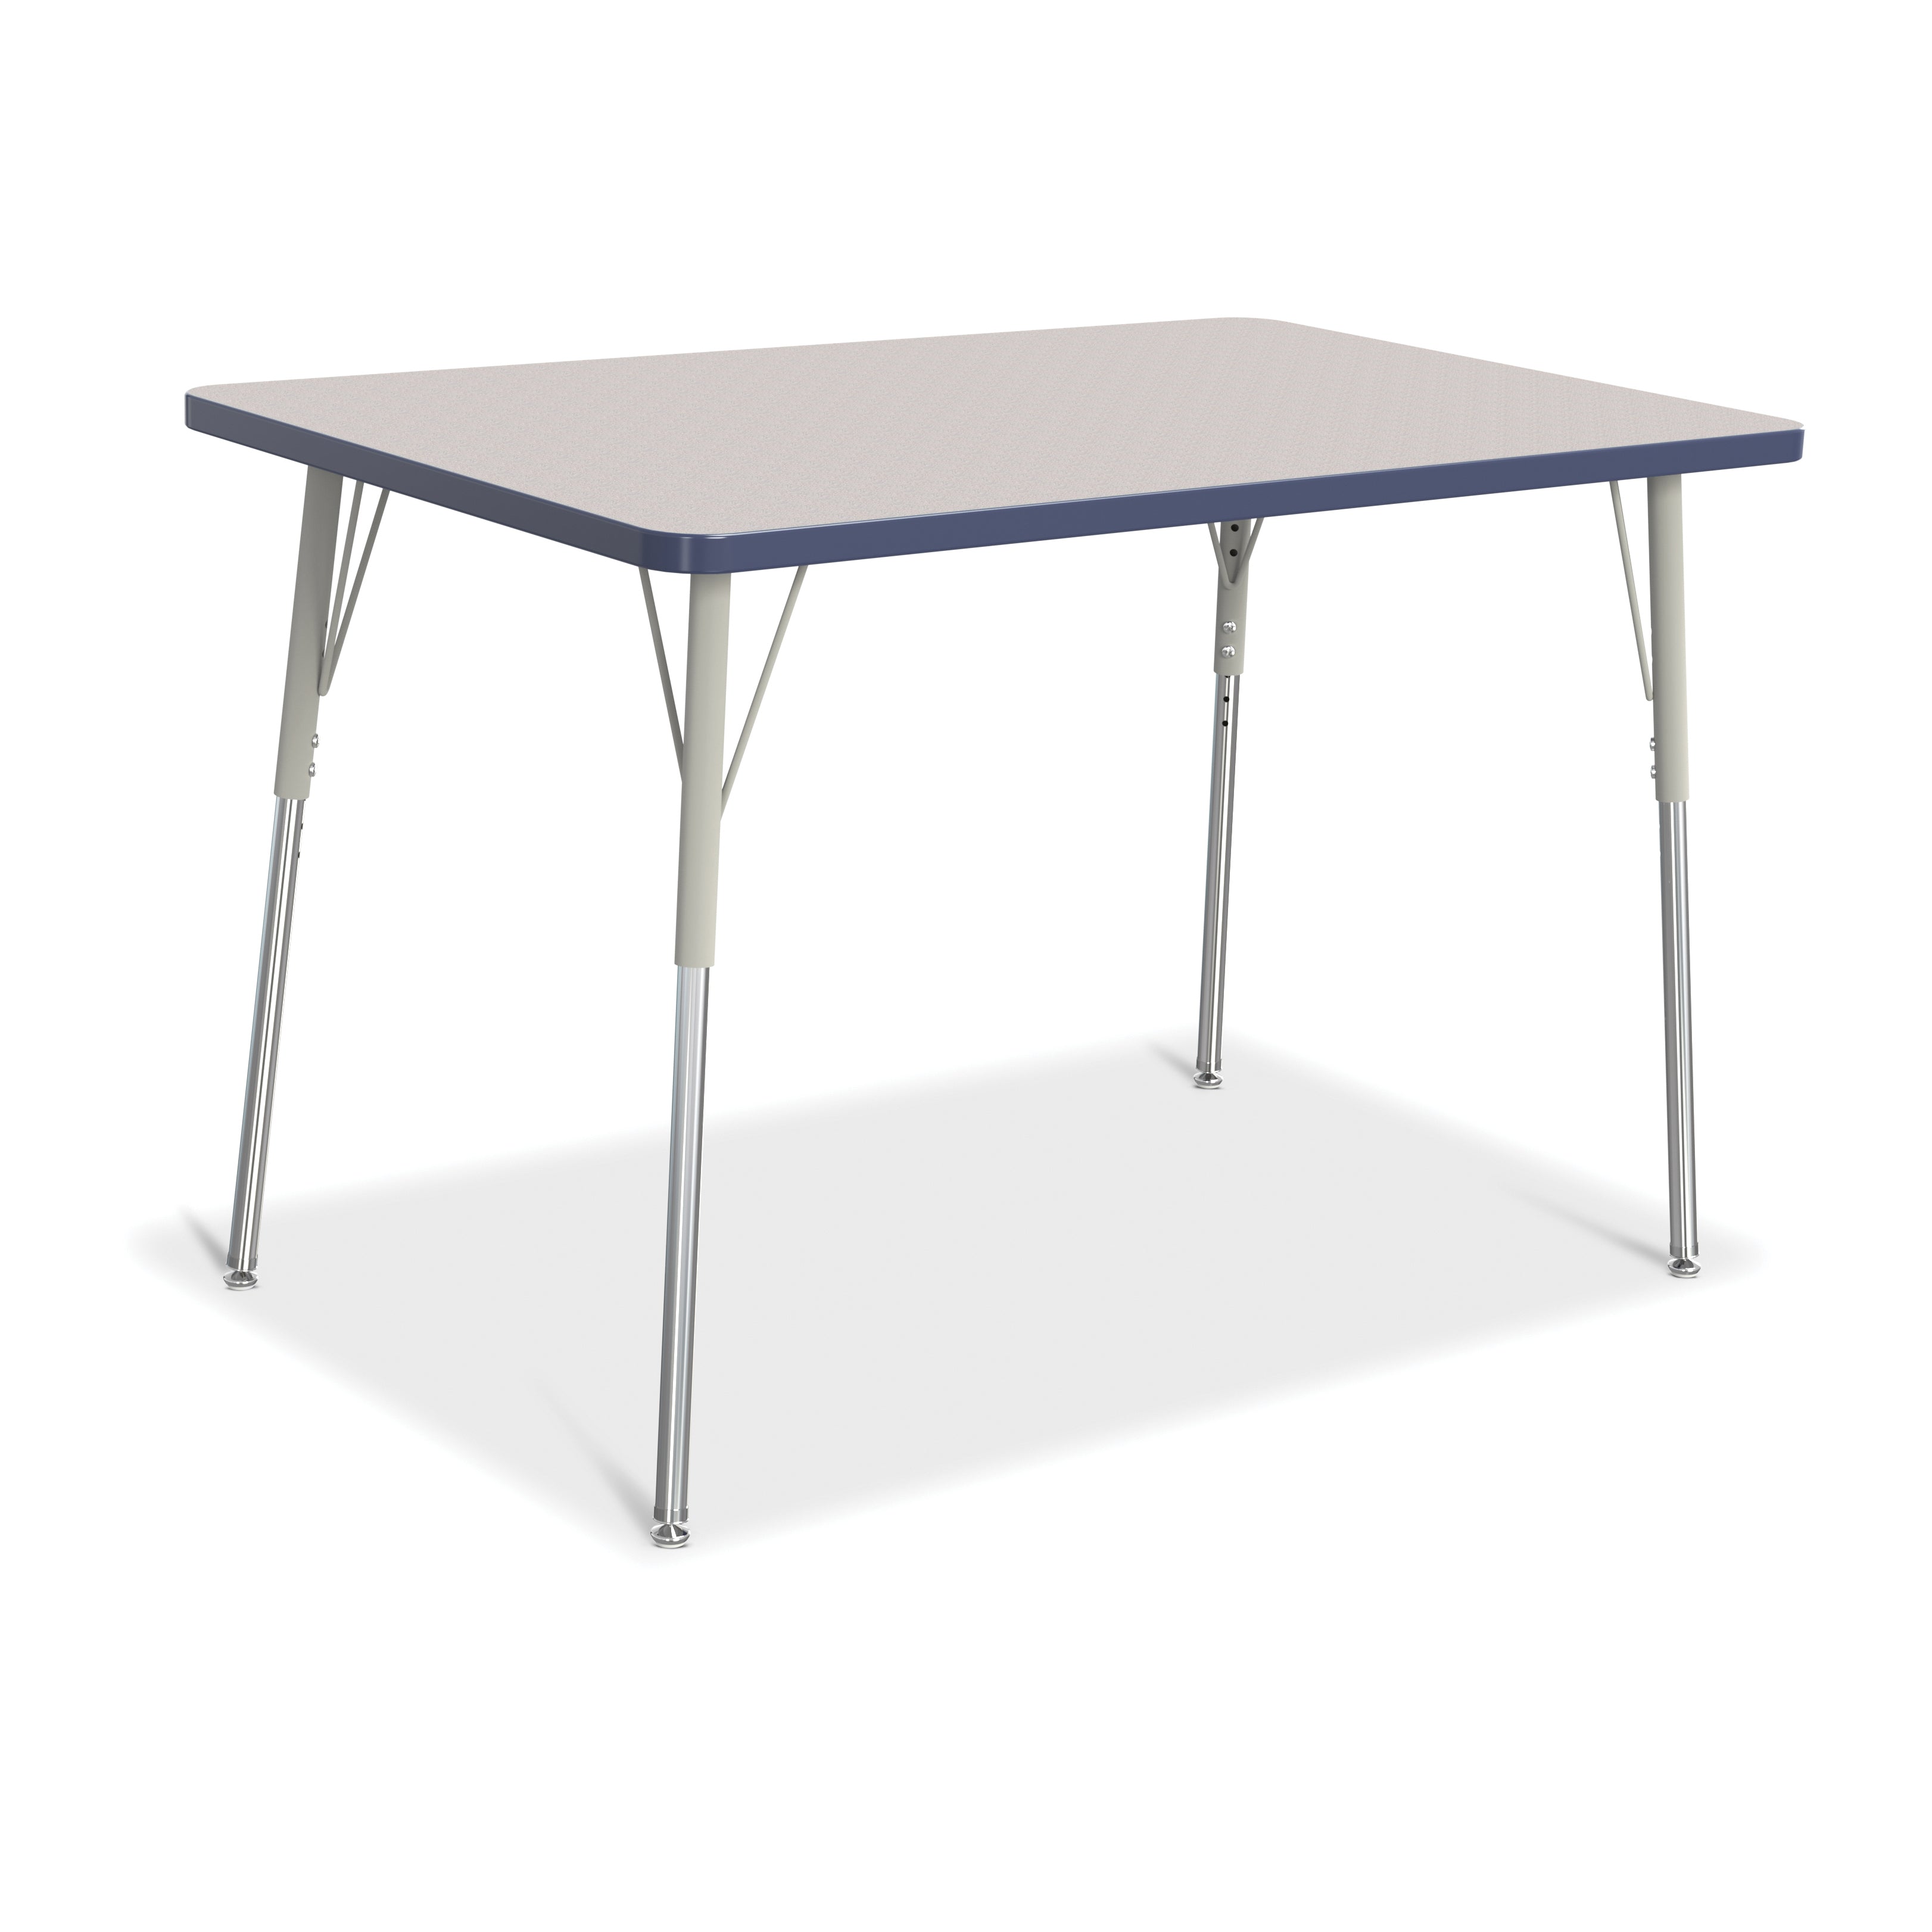 6473JCA112, Berries Rectangle Activity Table - 30" X 48", A-height - Freckled Gray/Navy/Gray